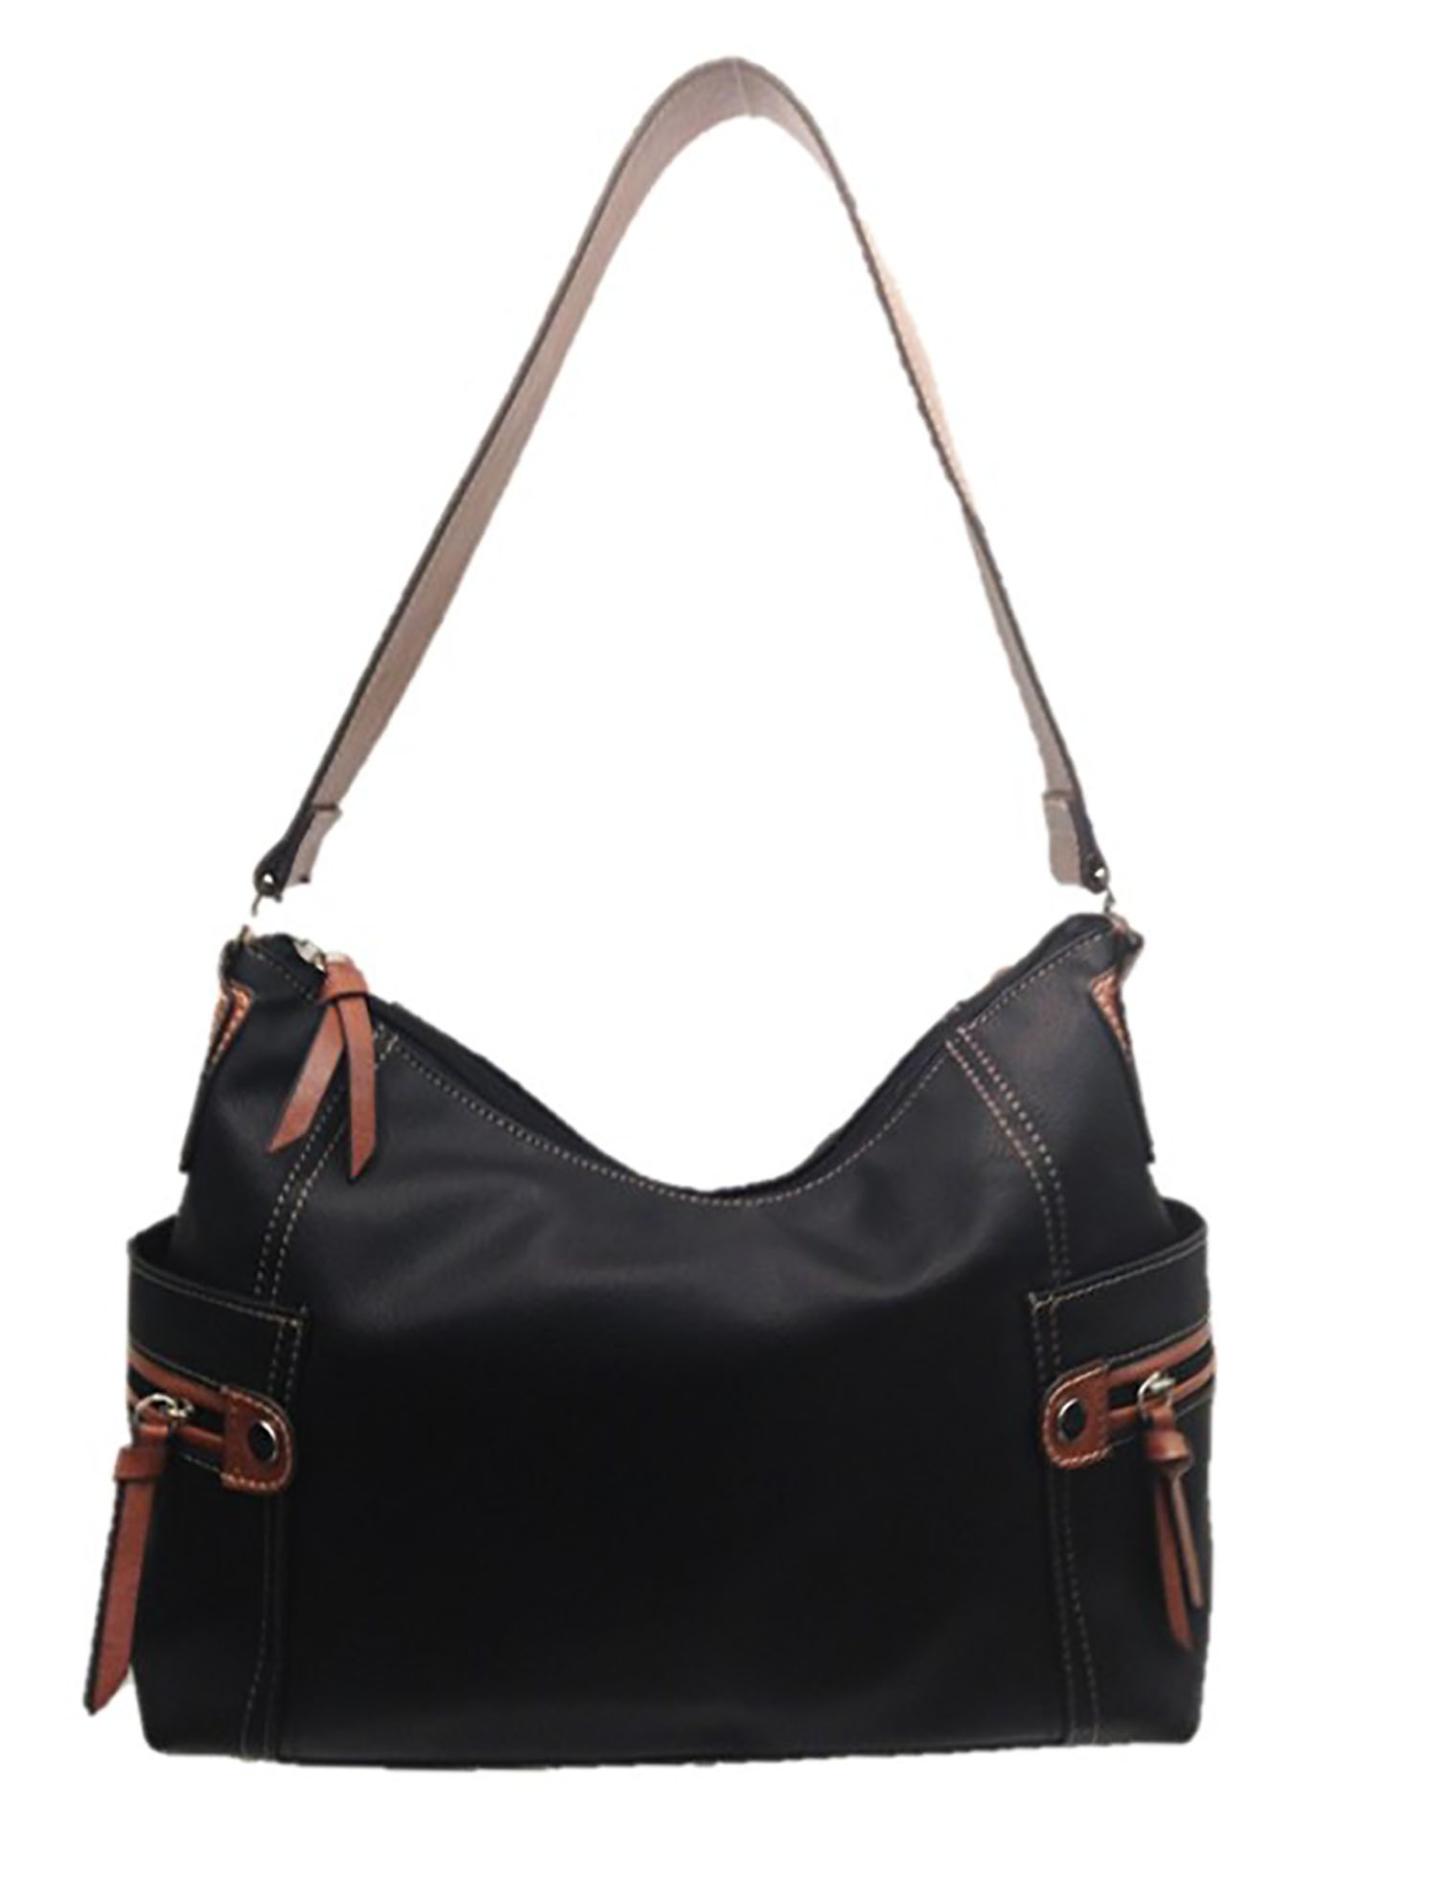 Private Label Women's Hot Topic Hobo Bag - Two-Tone